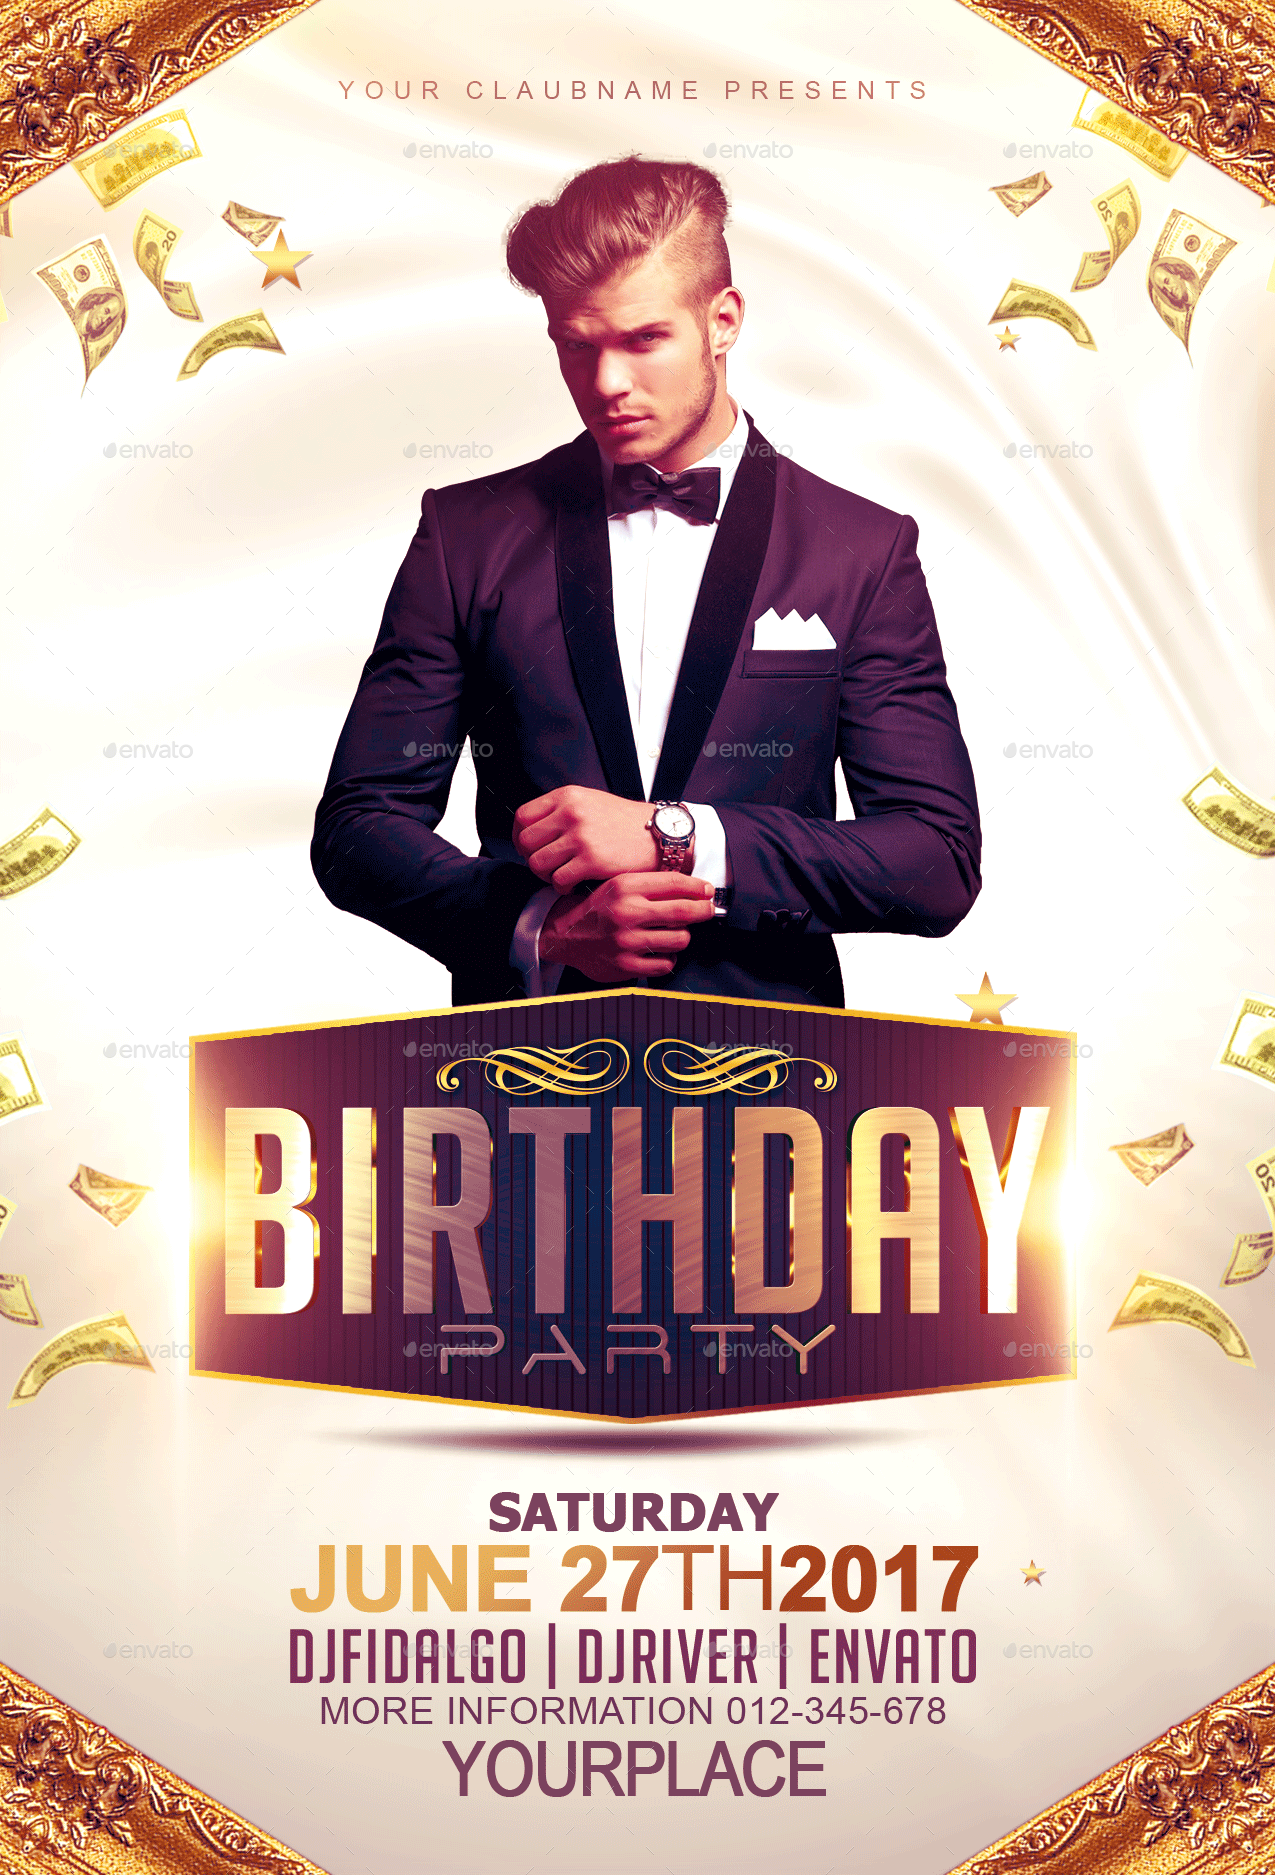 Birthday Party Flyer Template 1 By FAS DESIGN GraphicRiver